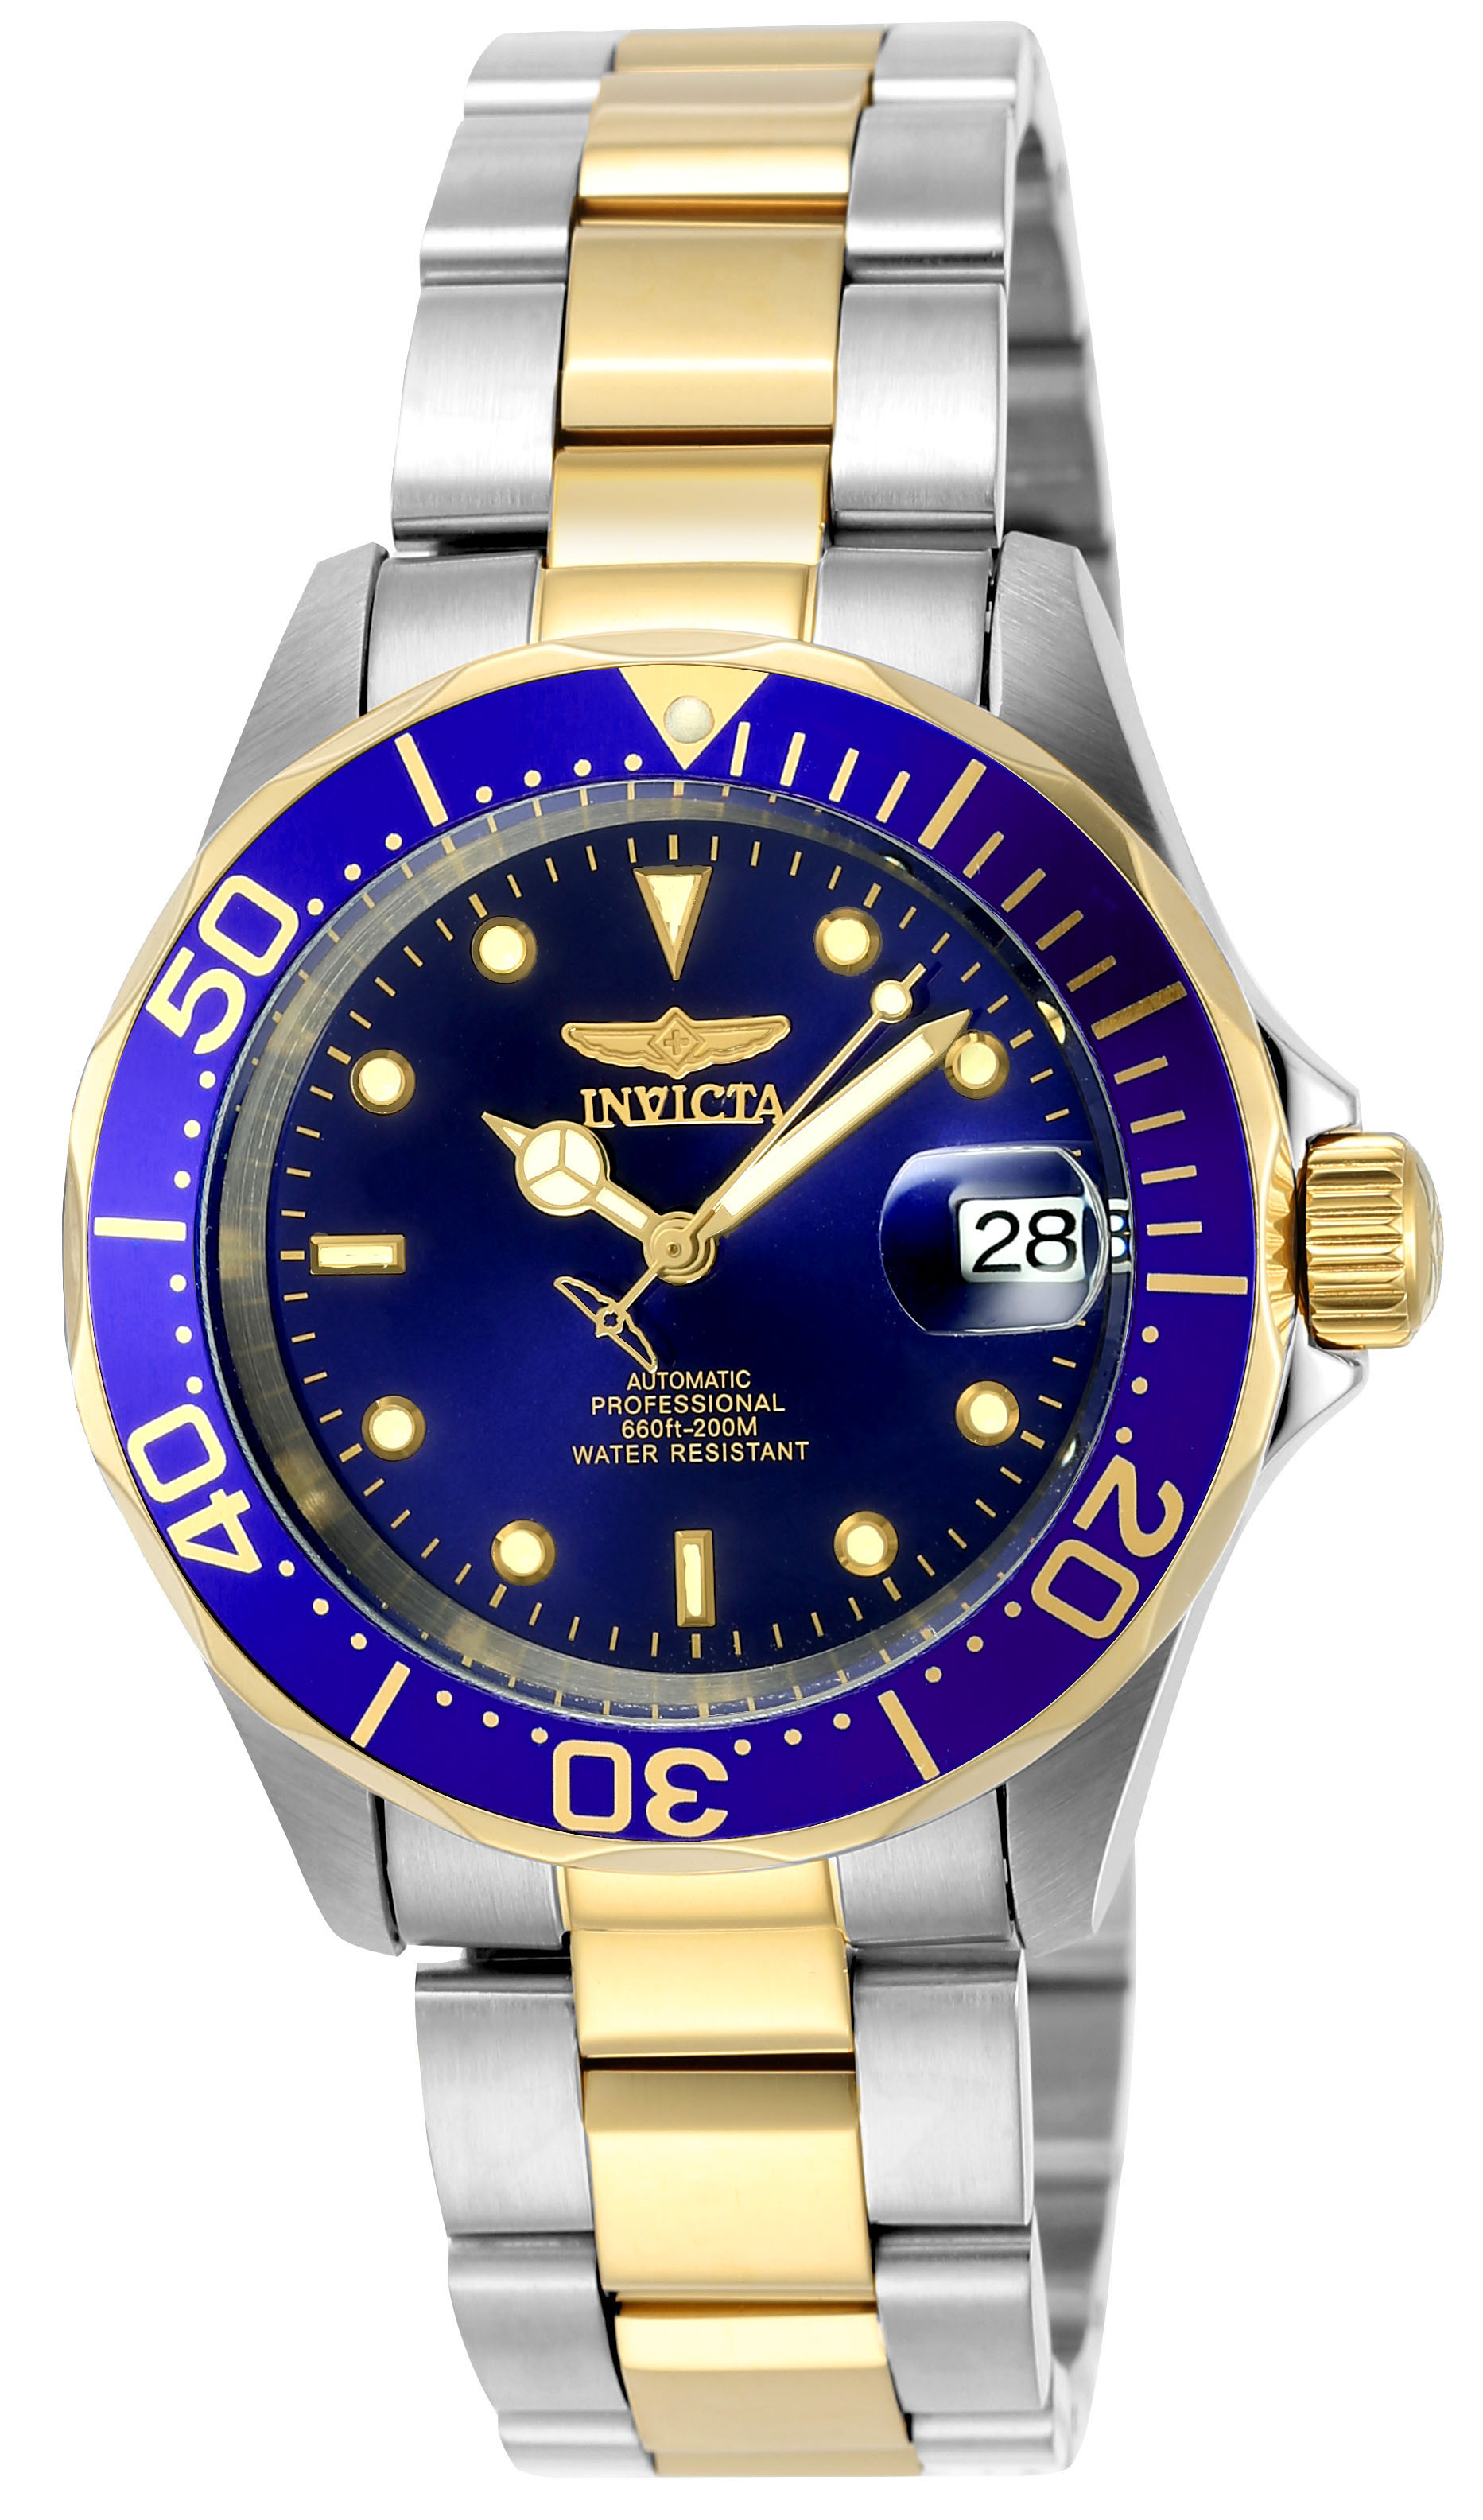 Invicta Pro Diver Automatic Men's Watch - 40mm, Steel, Gold (8928)